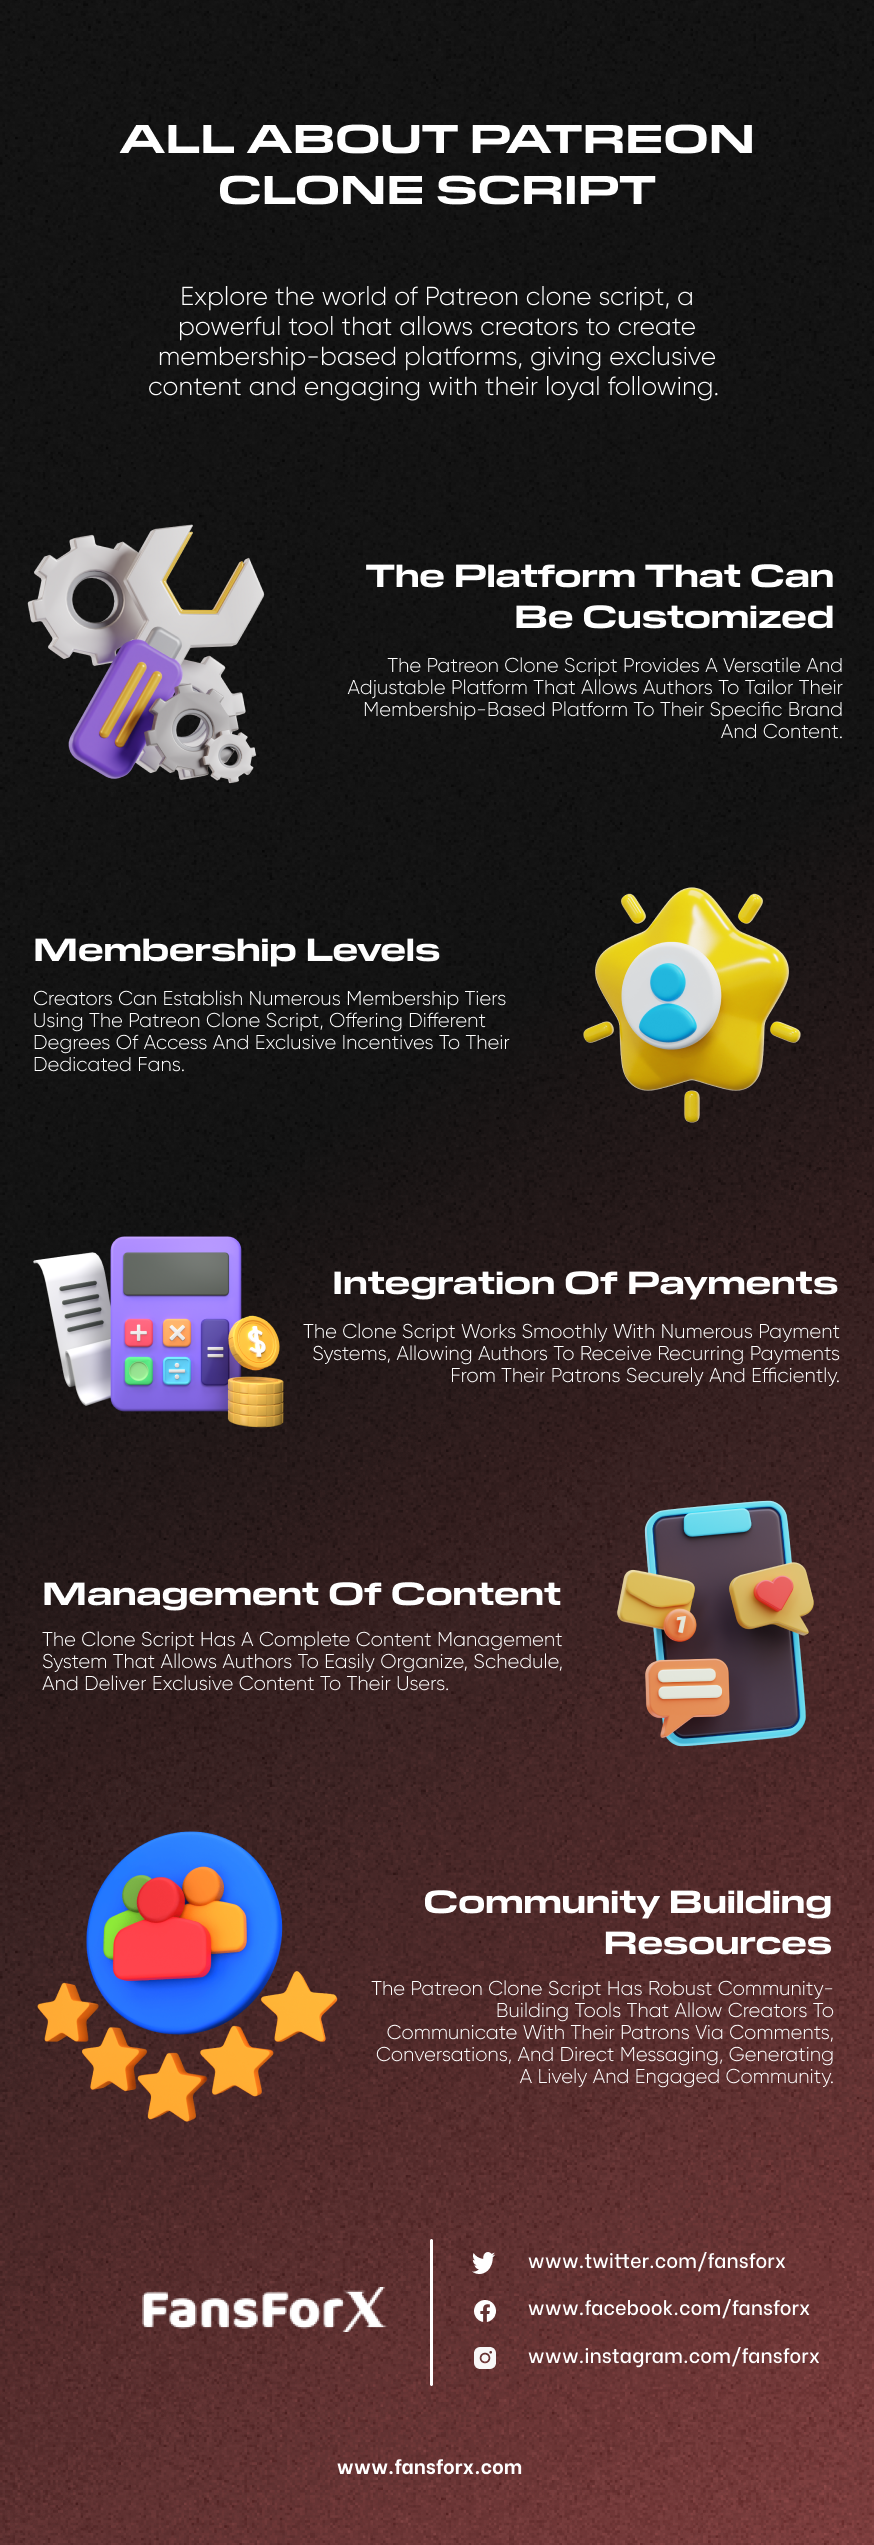 All about Patreon clone script #infographic